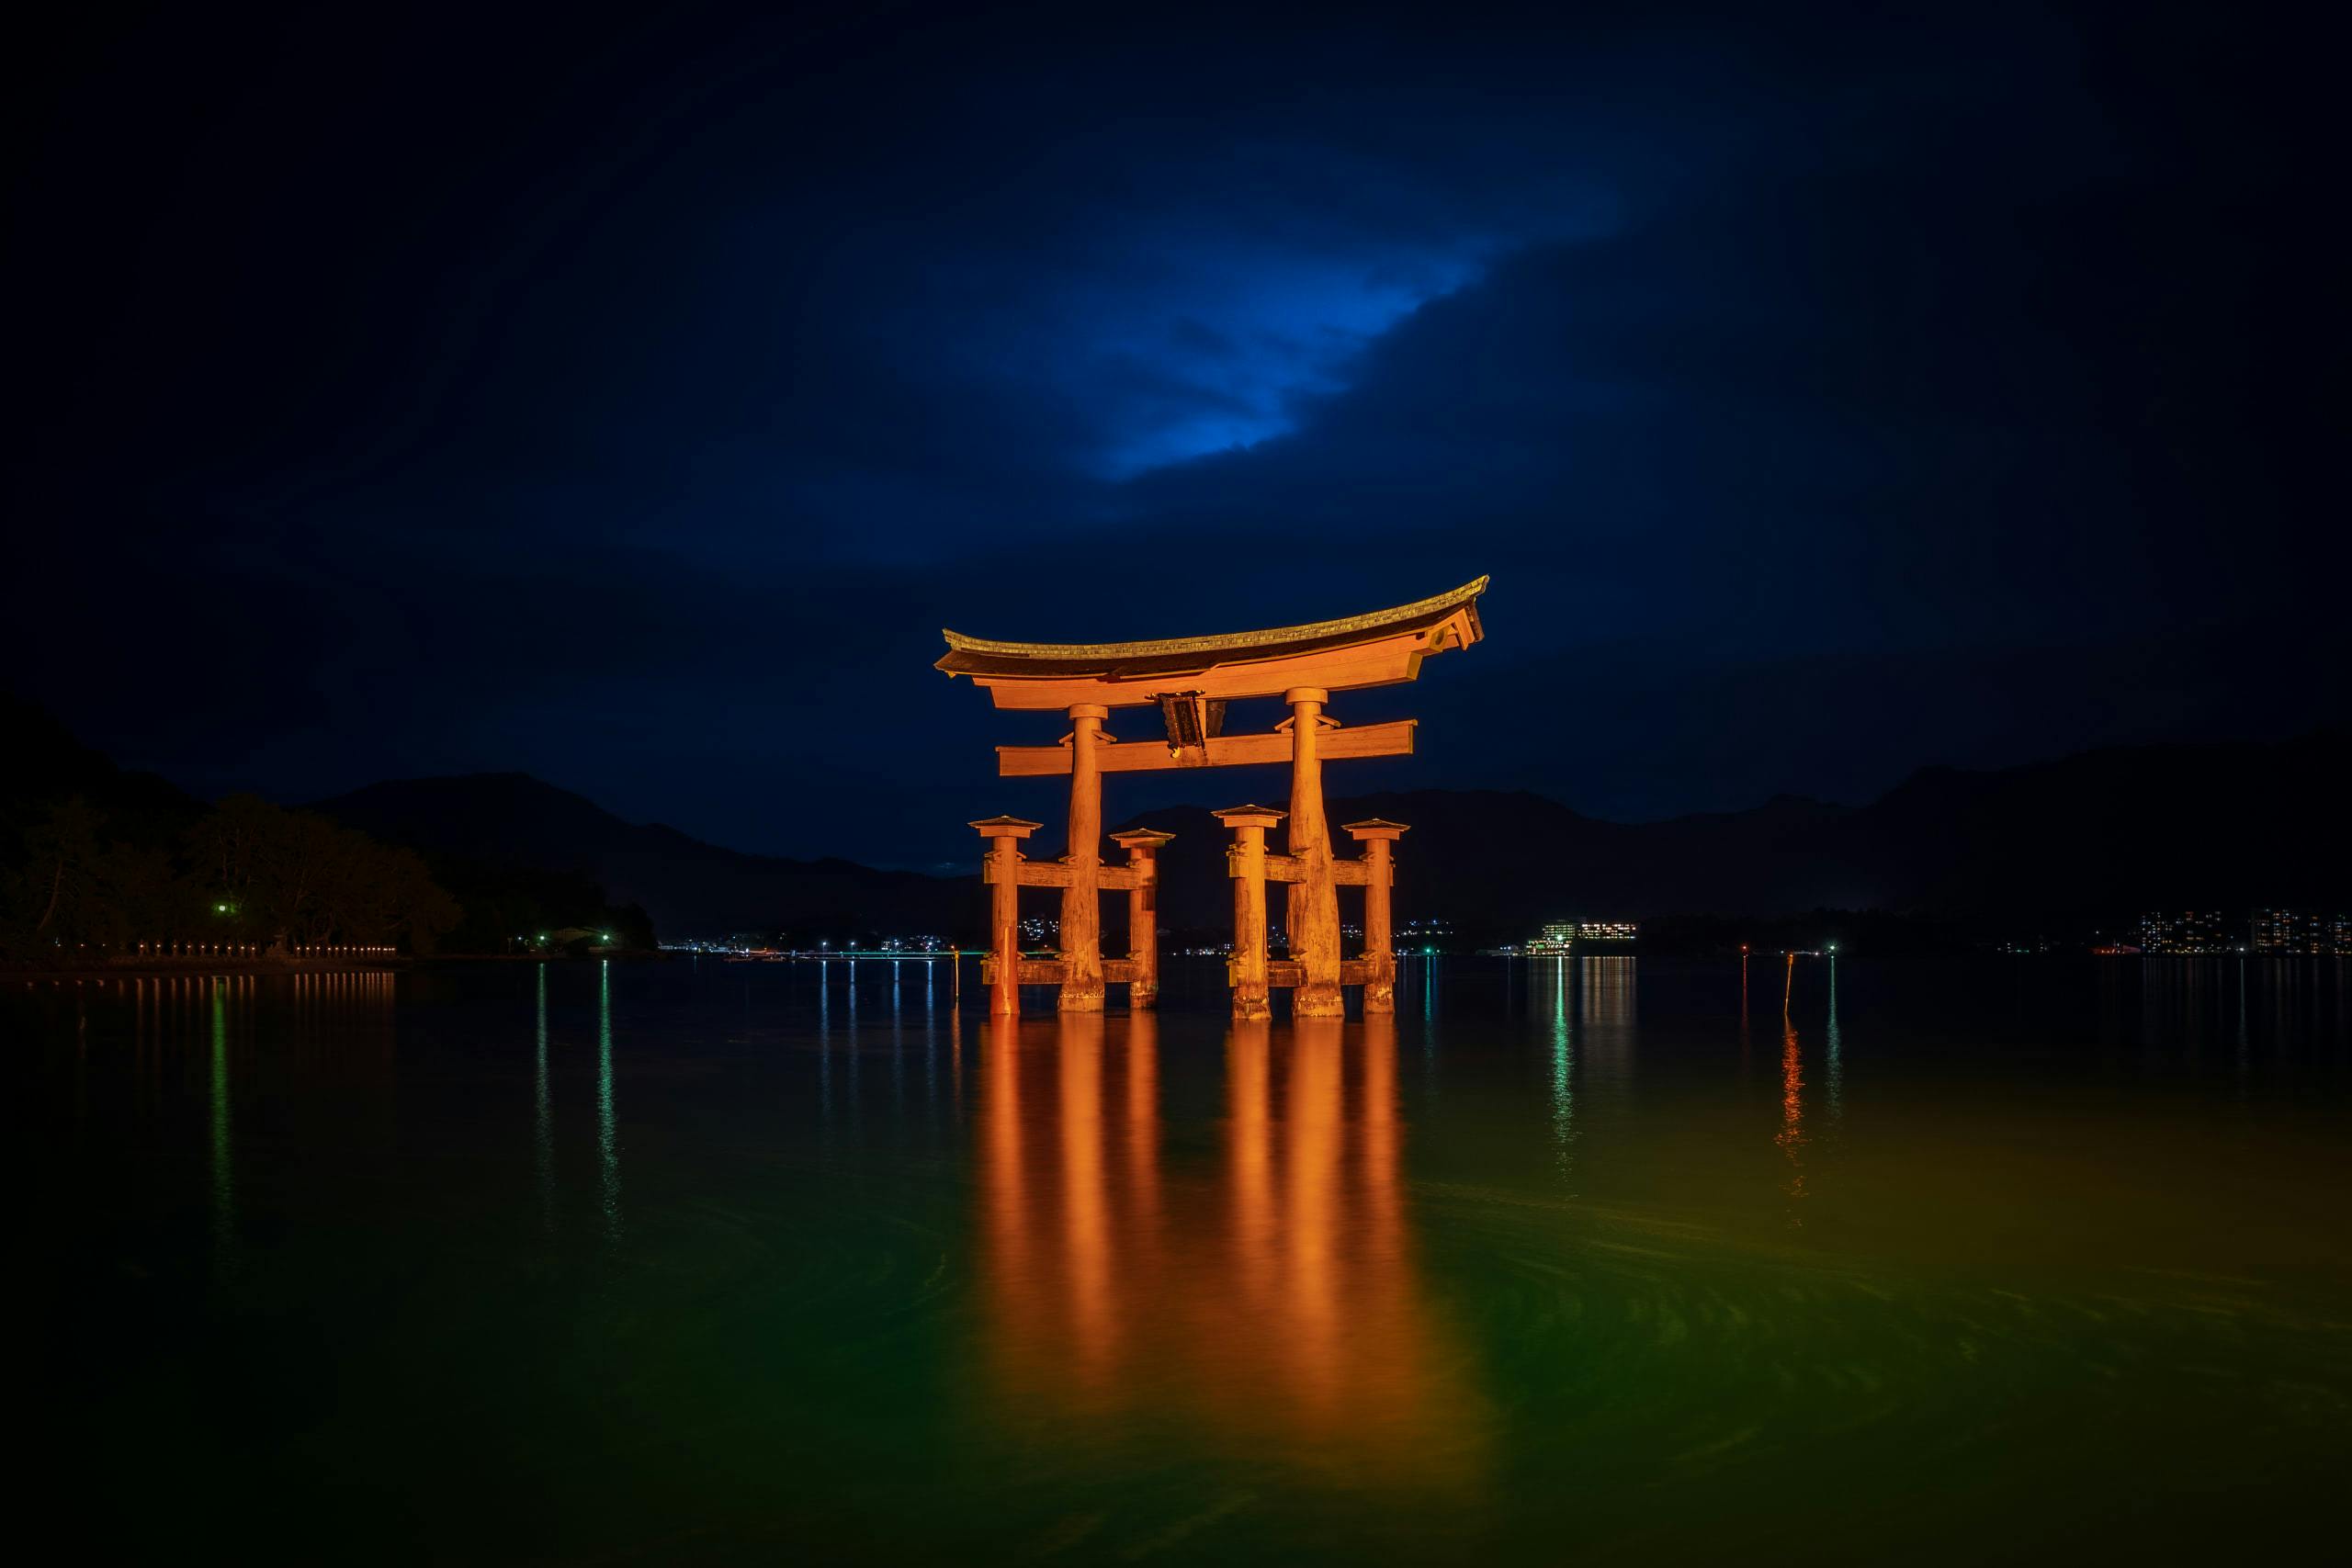 Floating torii gate on water at night